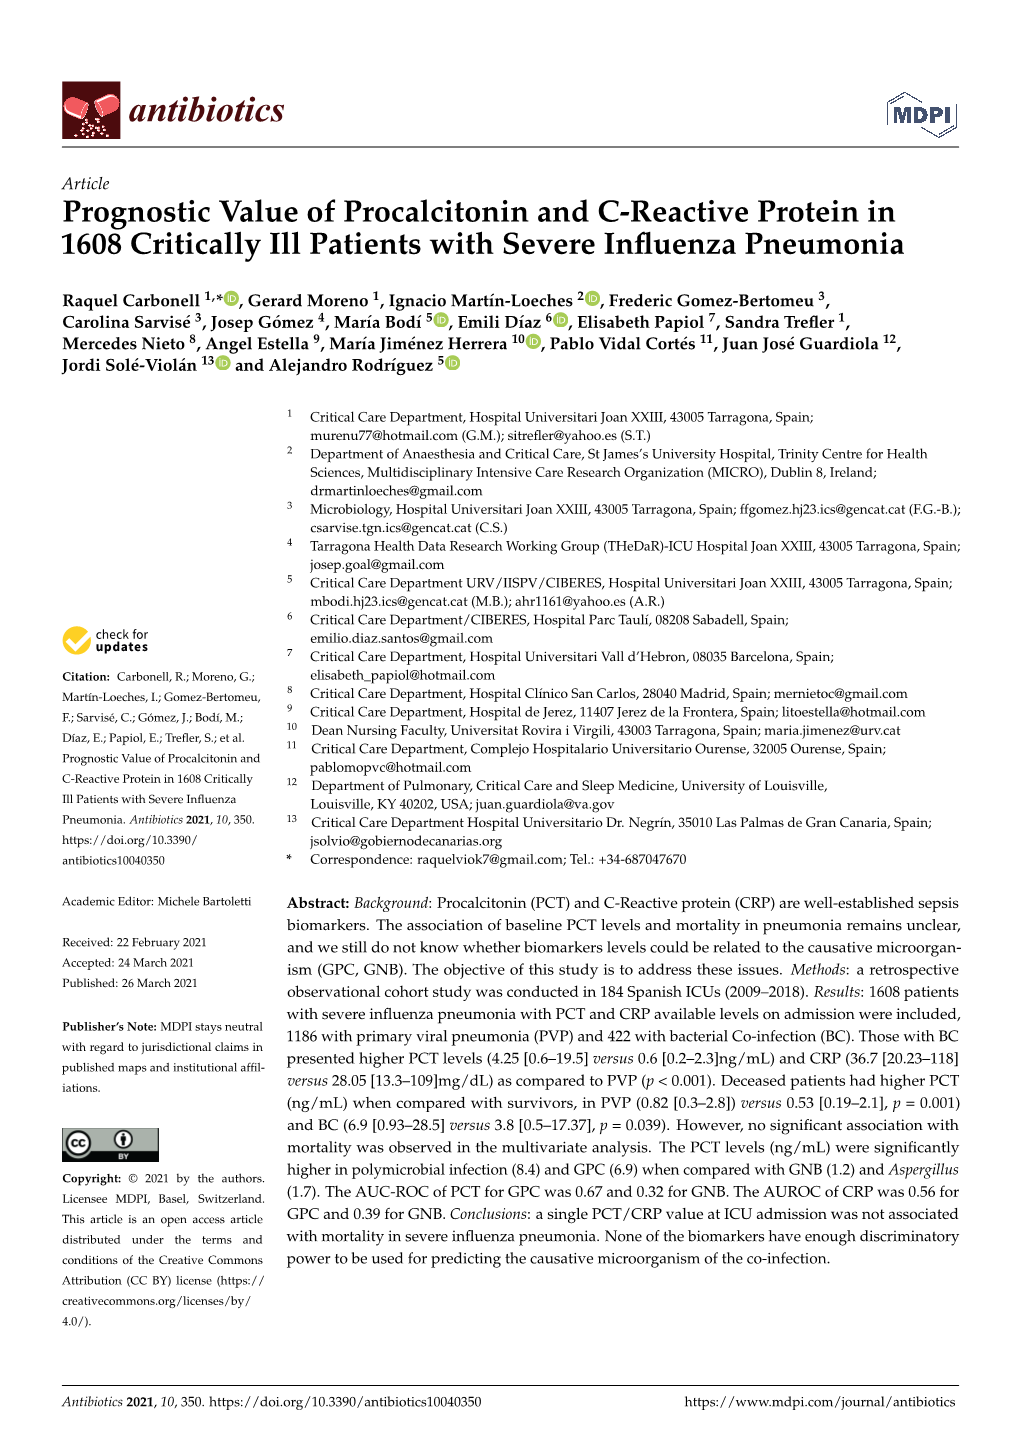 Prognostic Value of Procalcitonin and C-Reactive Protein in 1608 Critically Ill Patients with Severe Inﬂuenza Pneumonia